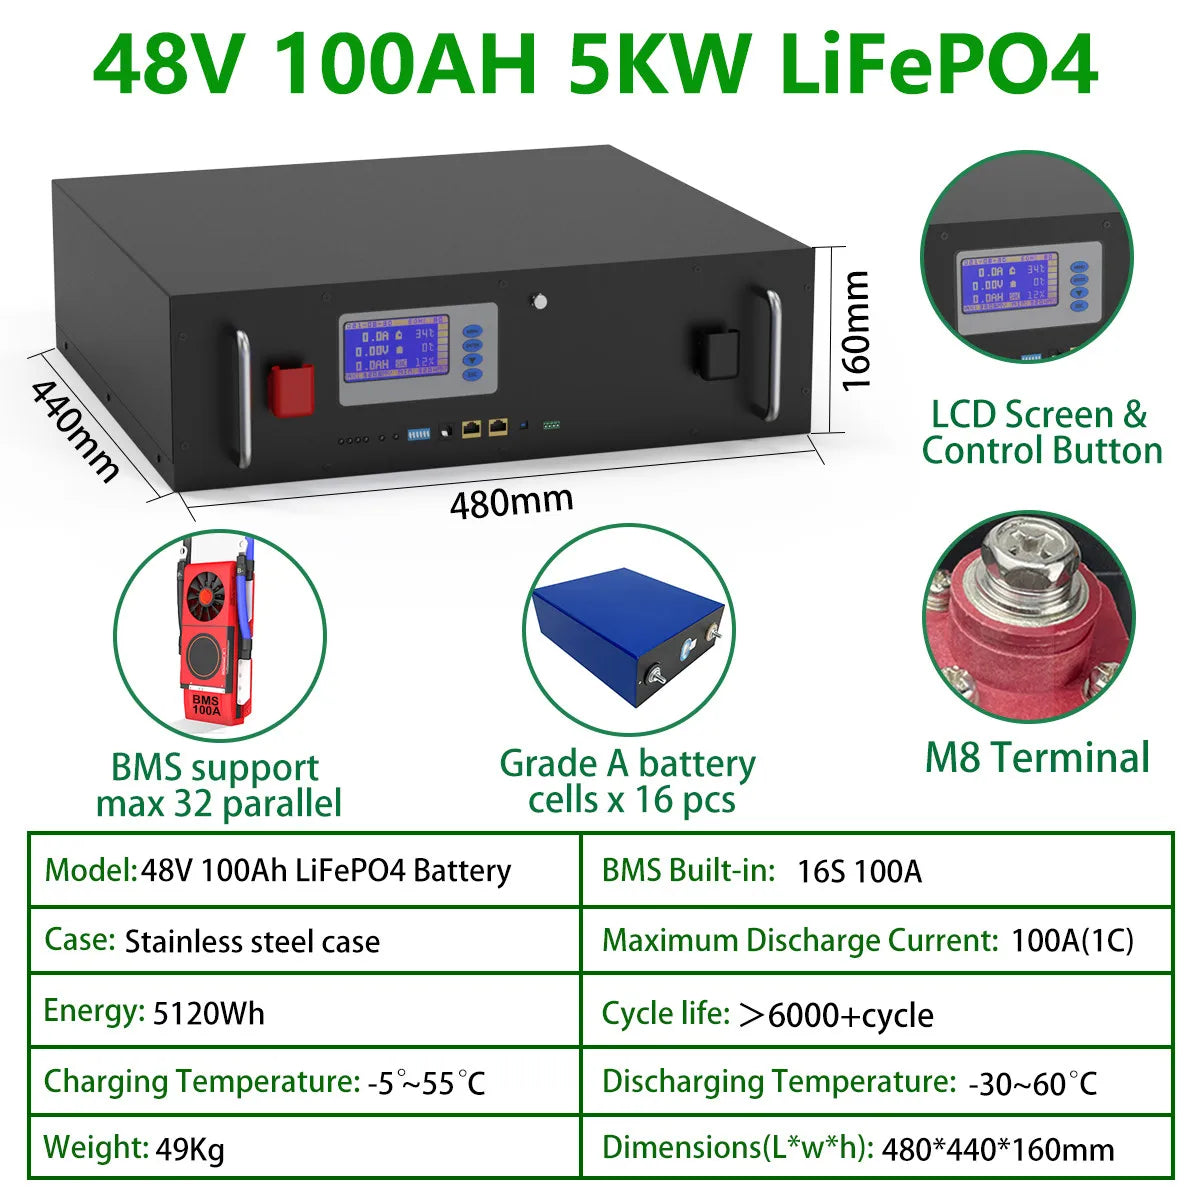 48V 100AH 200AH LiFePO4 Battery, RS485 CAN BUS PC